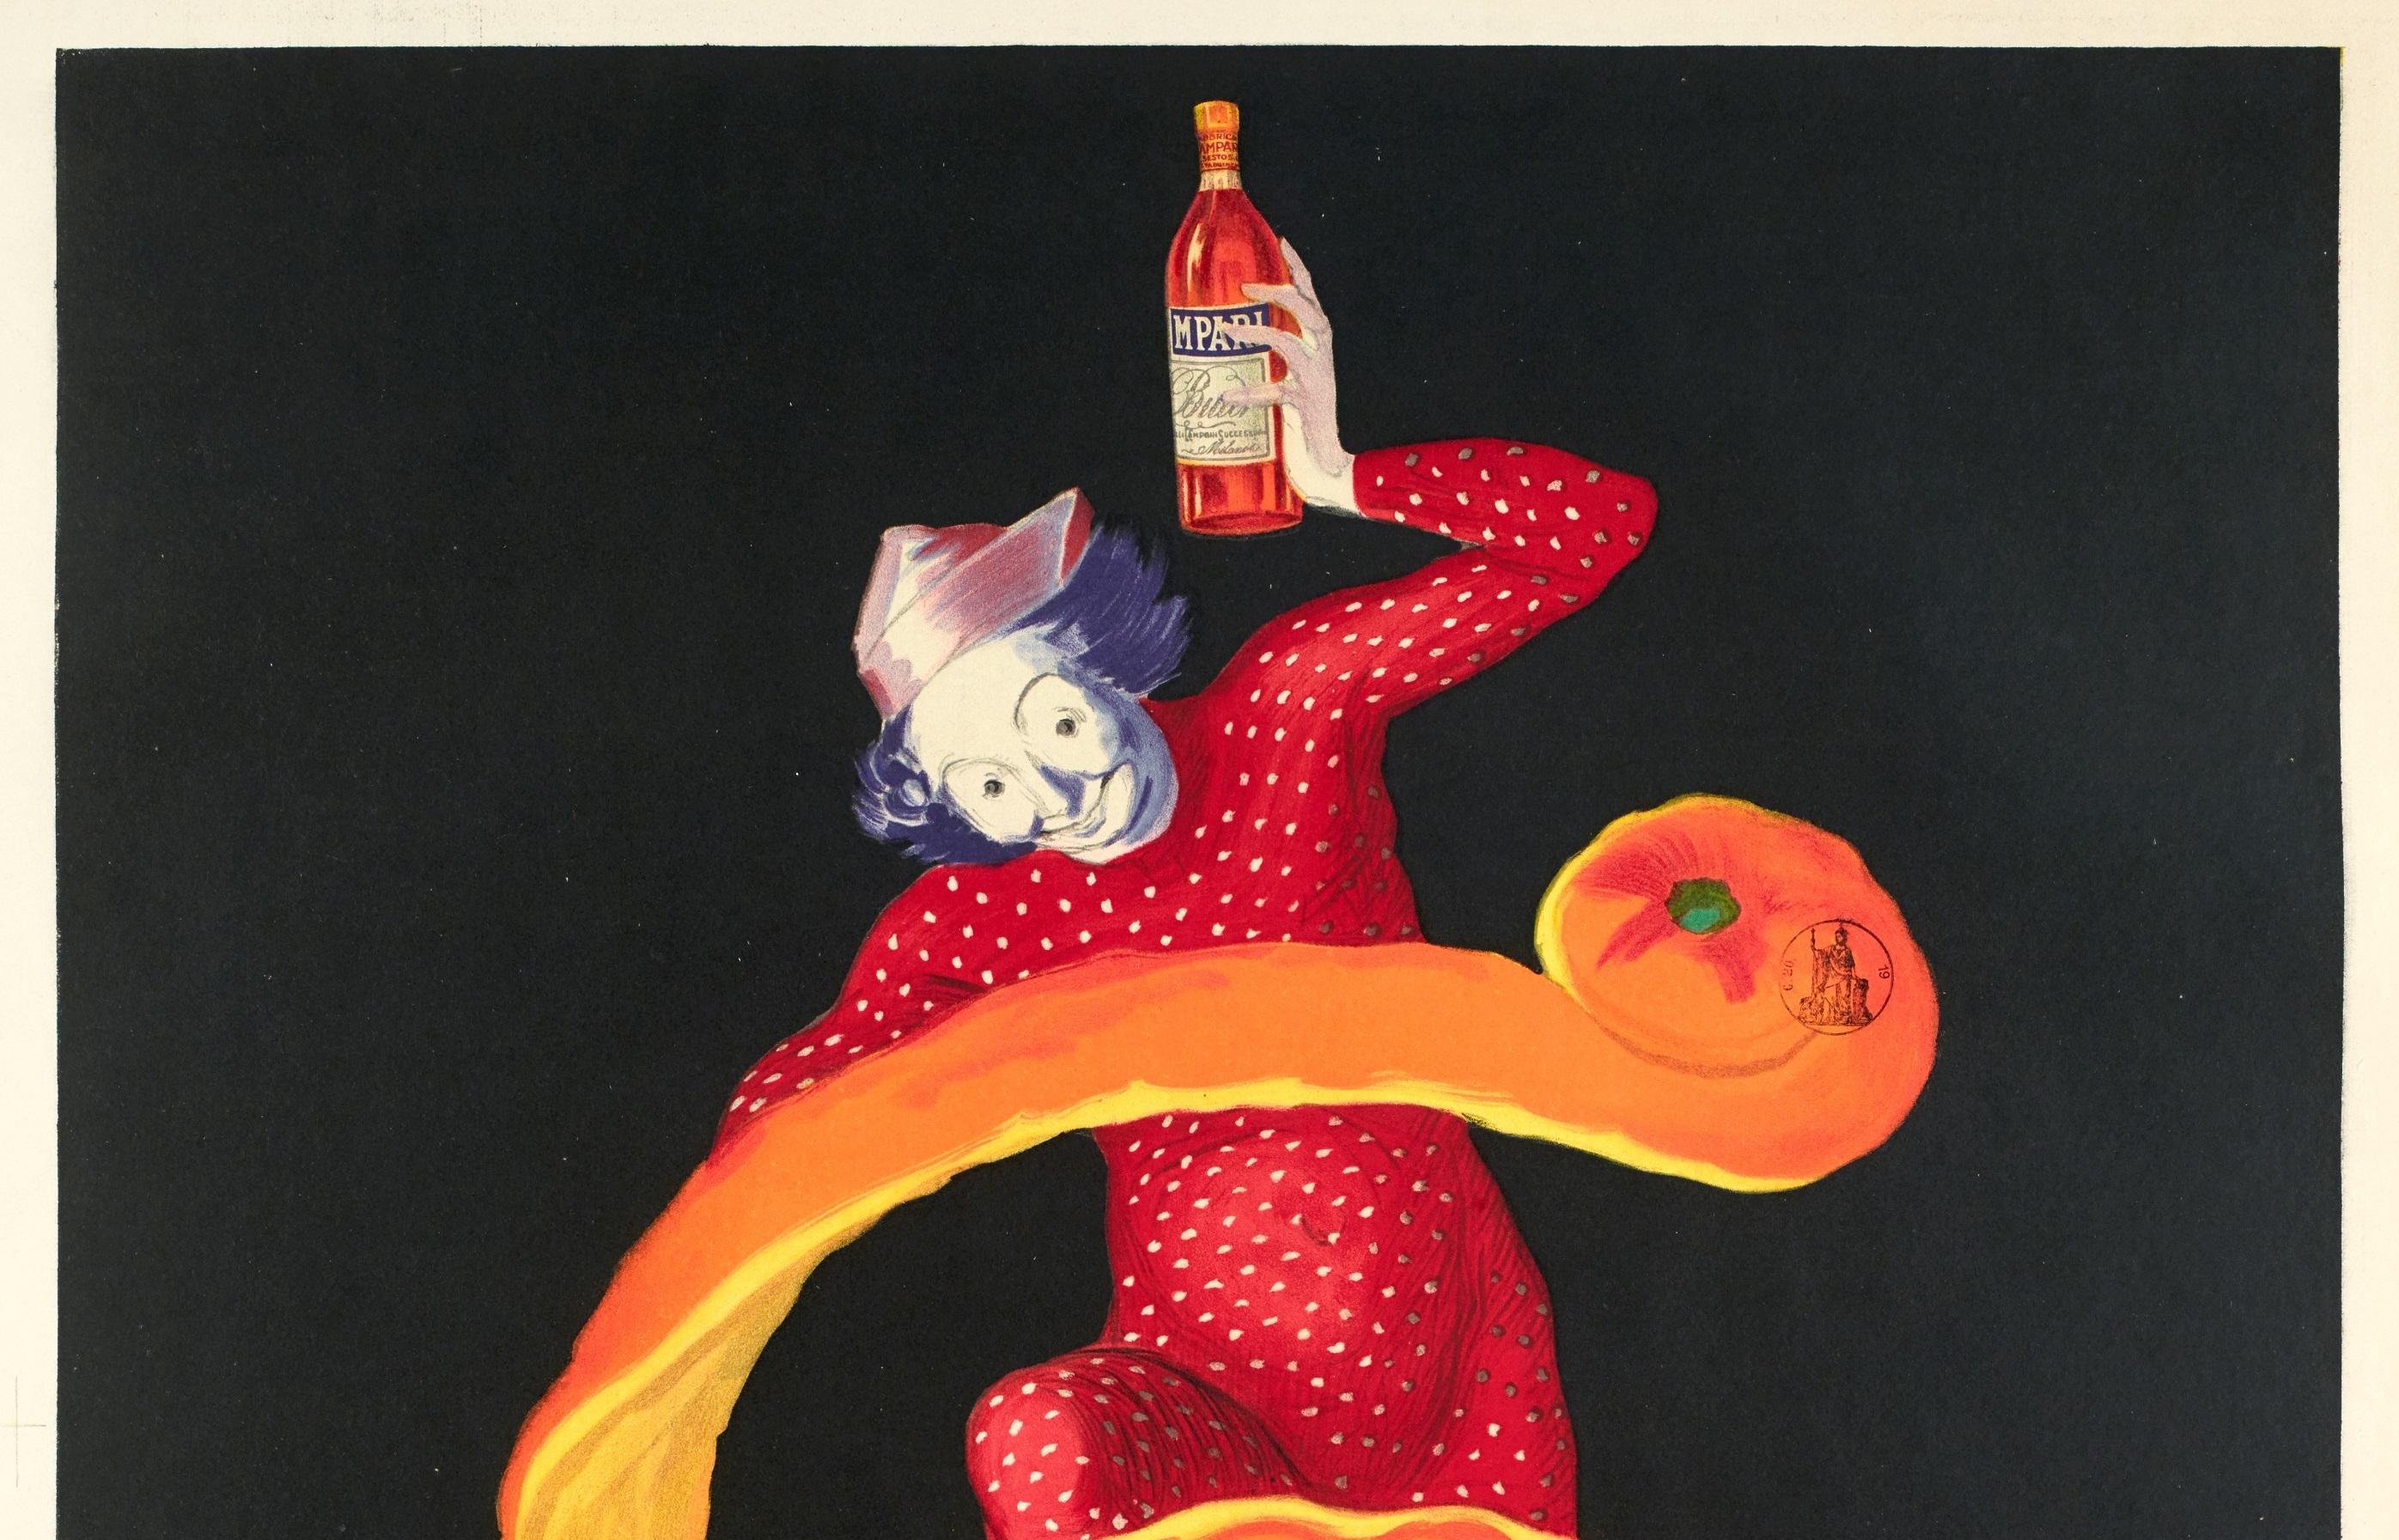 Original Vintage Alcohol Poster for Bitter Campari dating from 1921 by Leonetto Cappiello.

Artist: Leonetto Cappiello (1875 - 1942) 
Title: Bitter Campari
Date: 1921
Size: 26.8 x 38.6 in / 68 x 98 cm
Printer : Les nouvelles affiches Cappiello